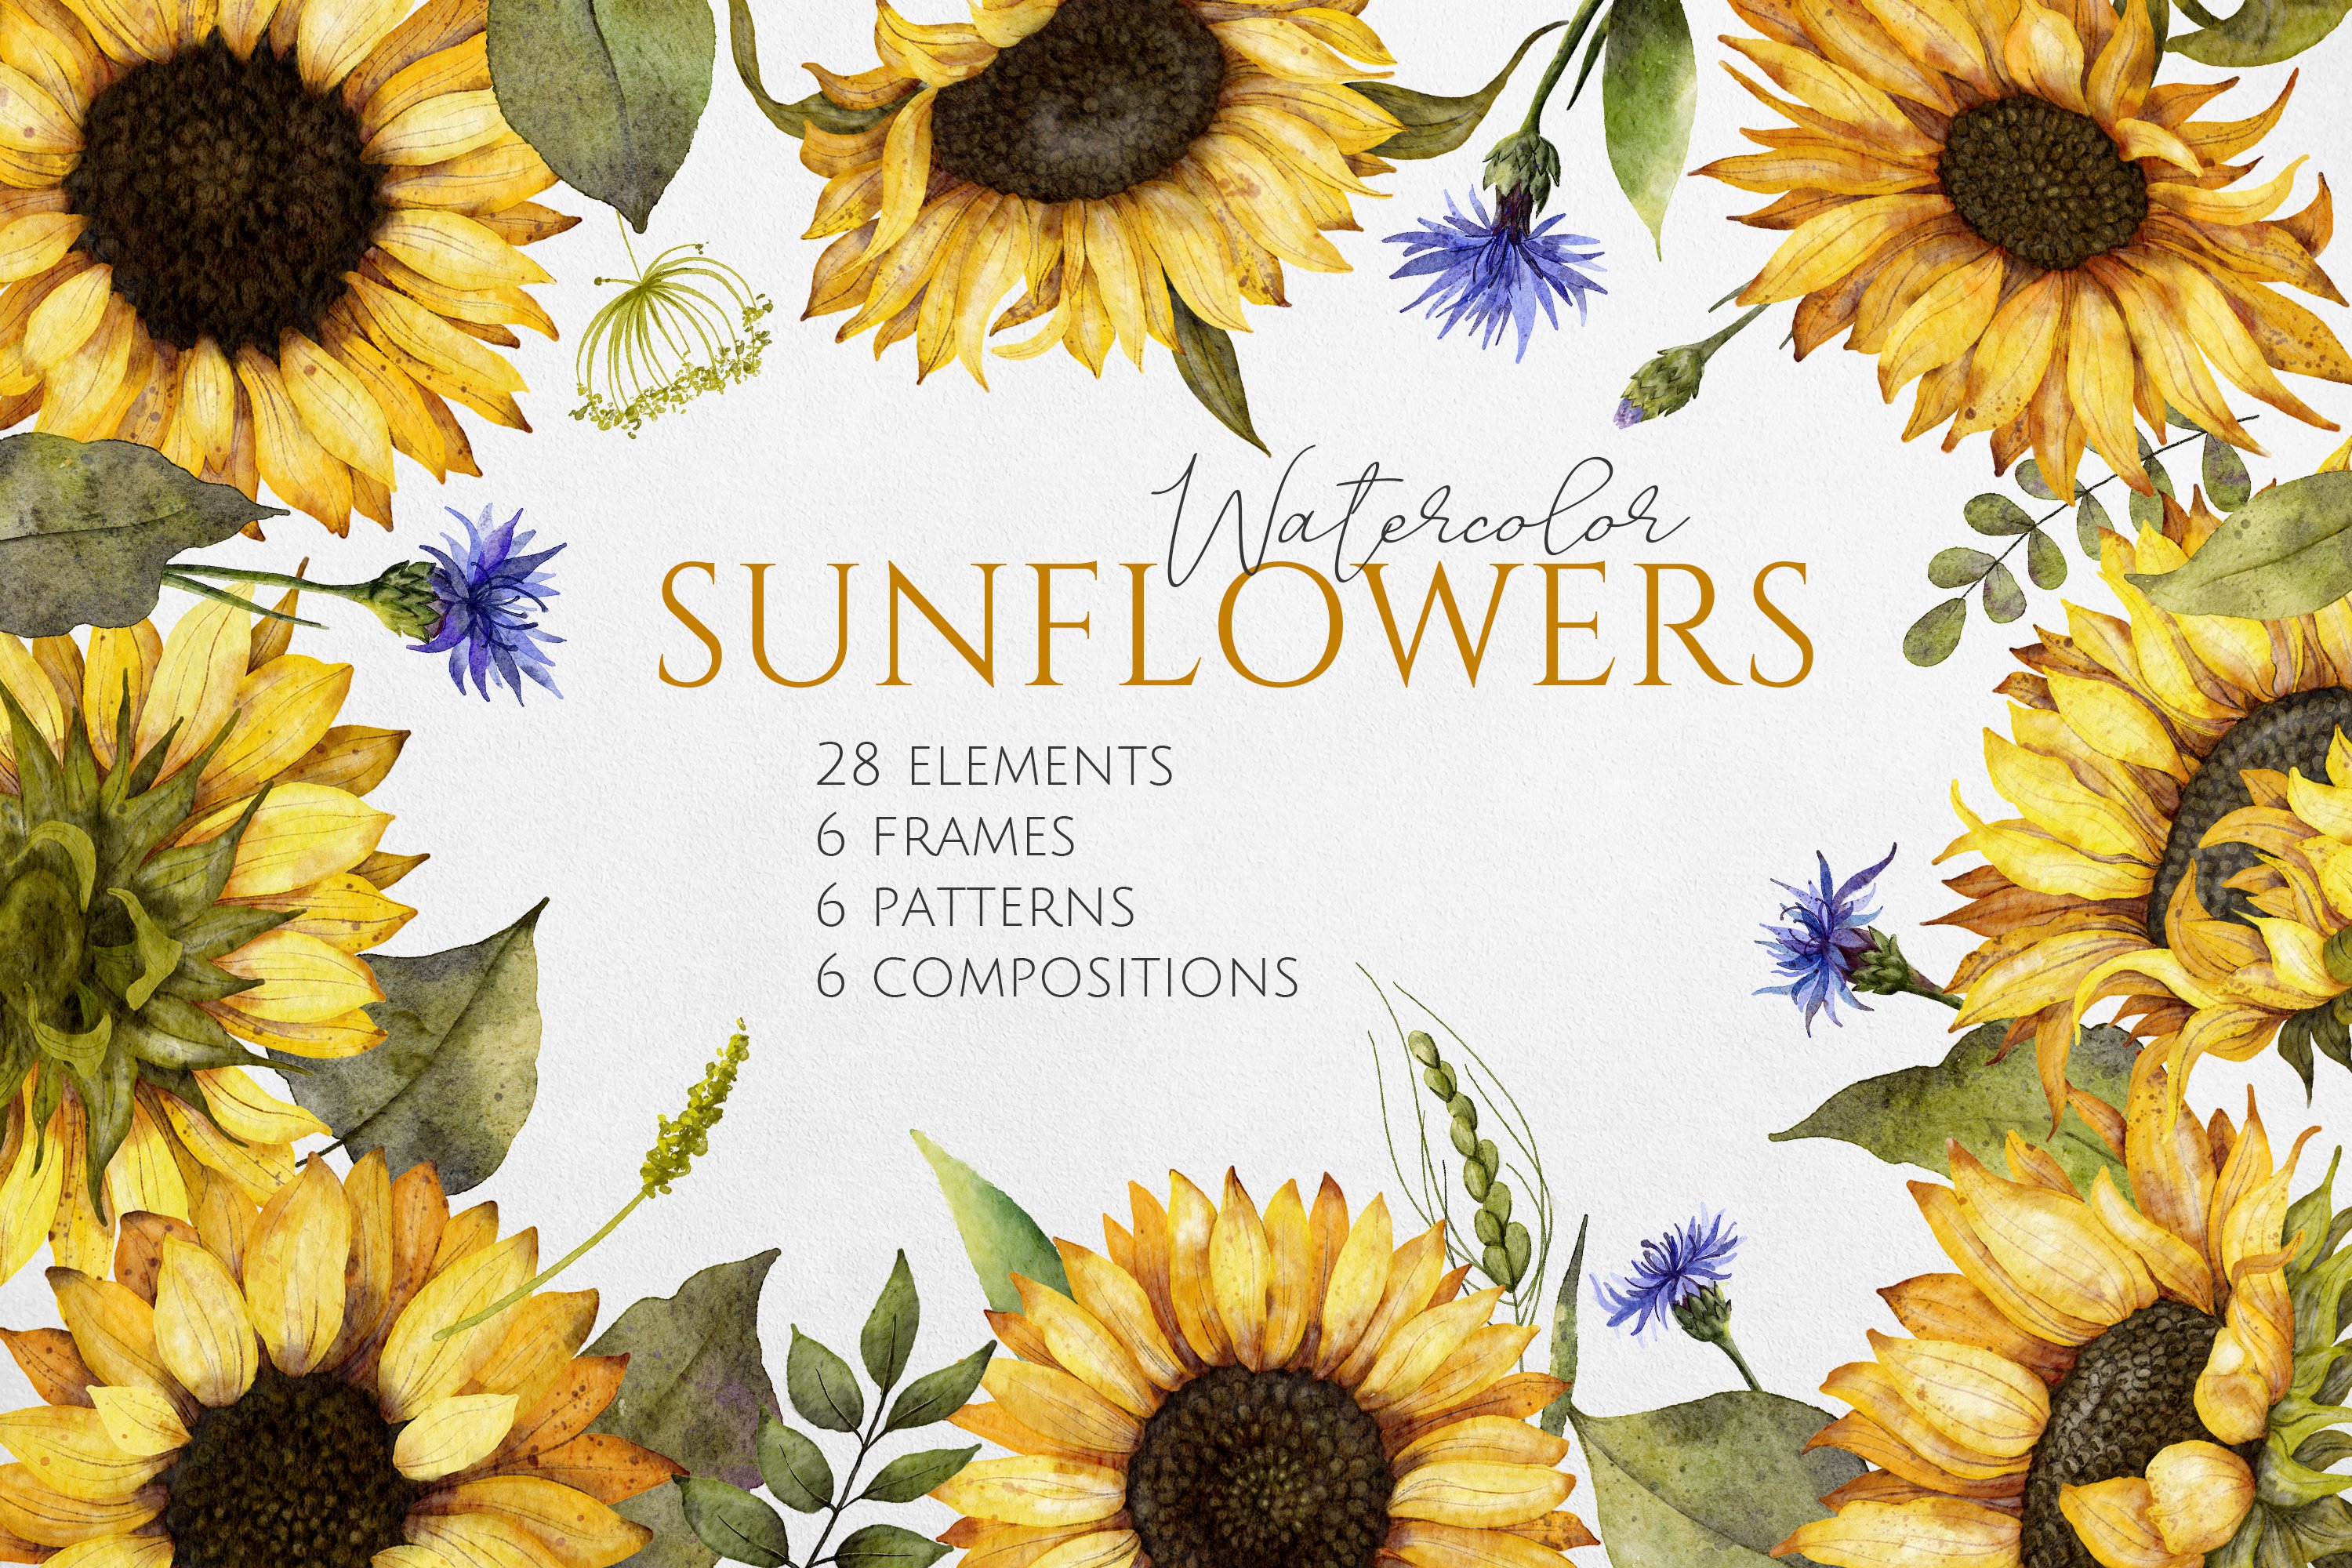 Watercolor Sunflowers Clipart cover image.